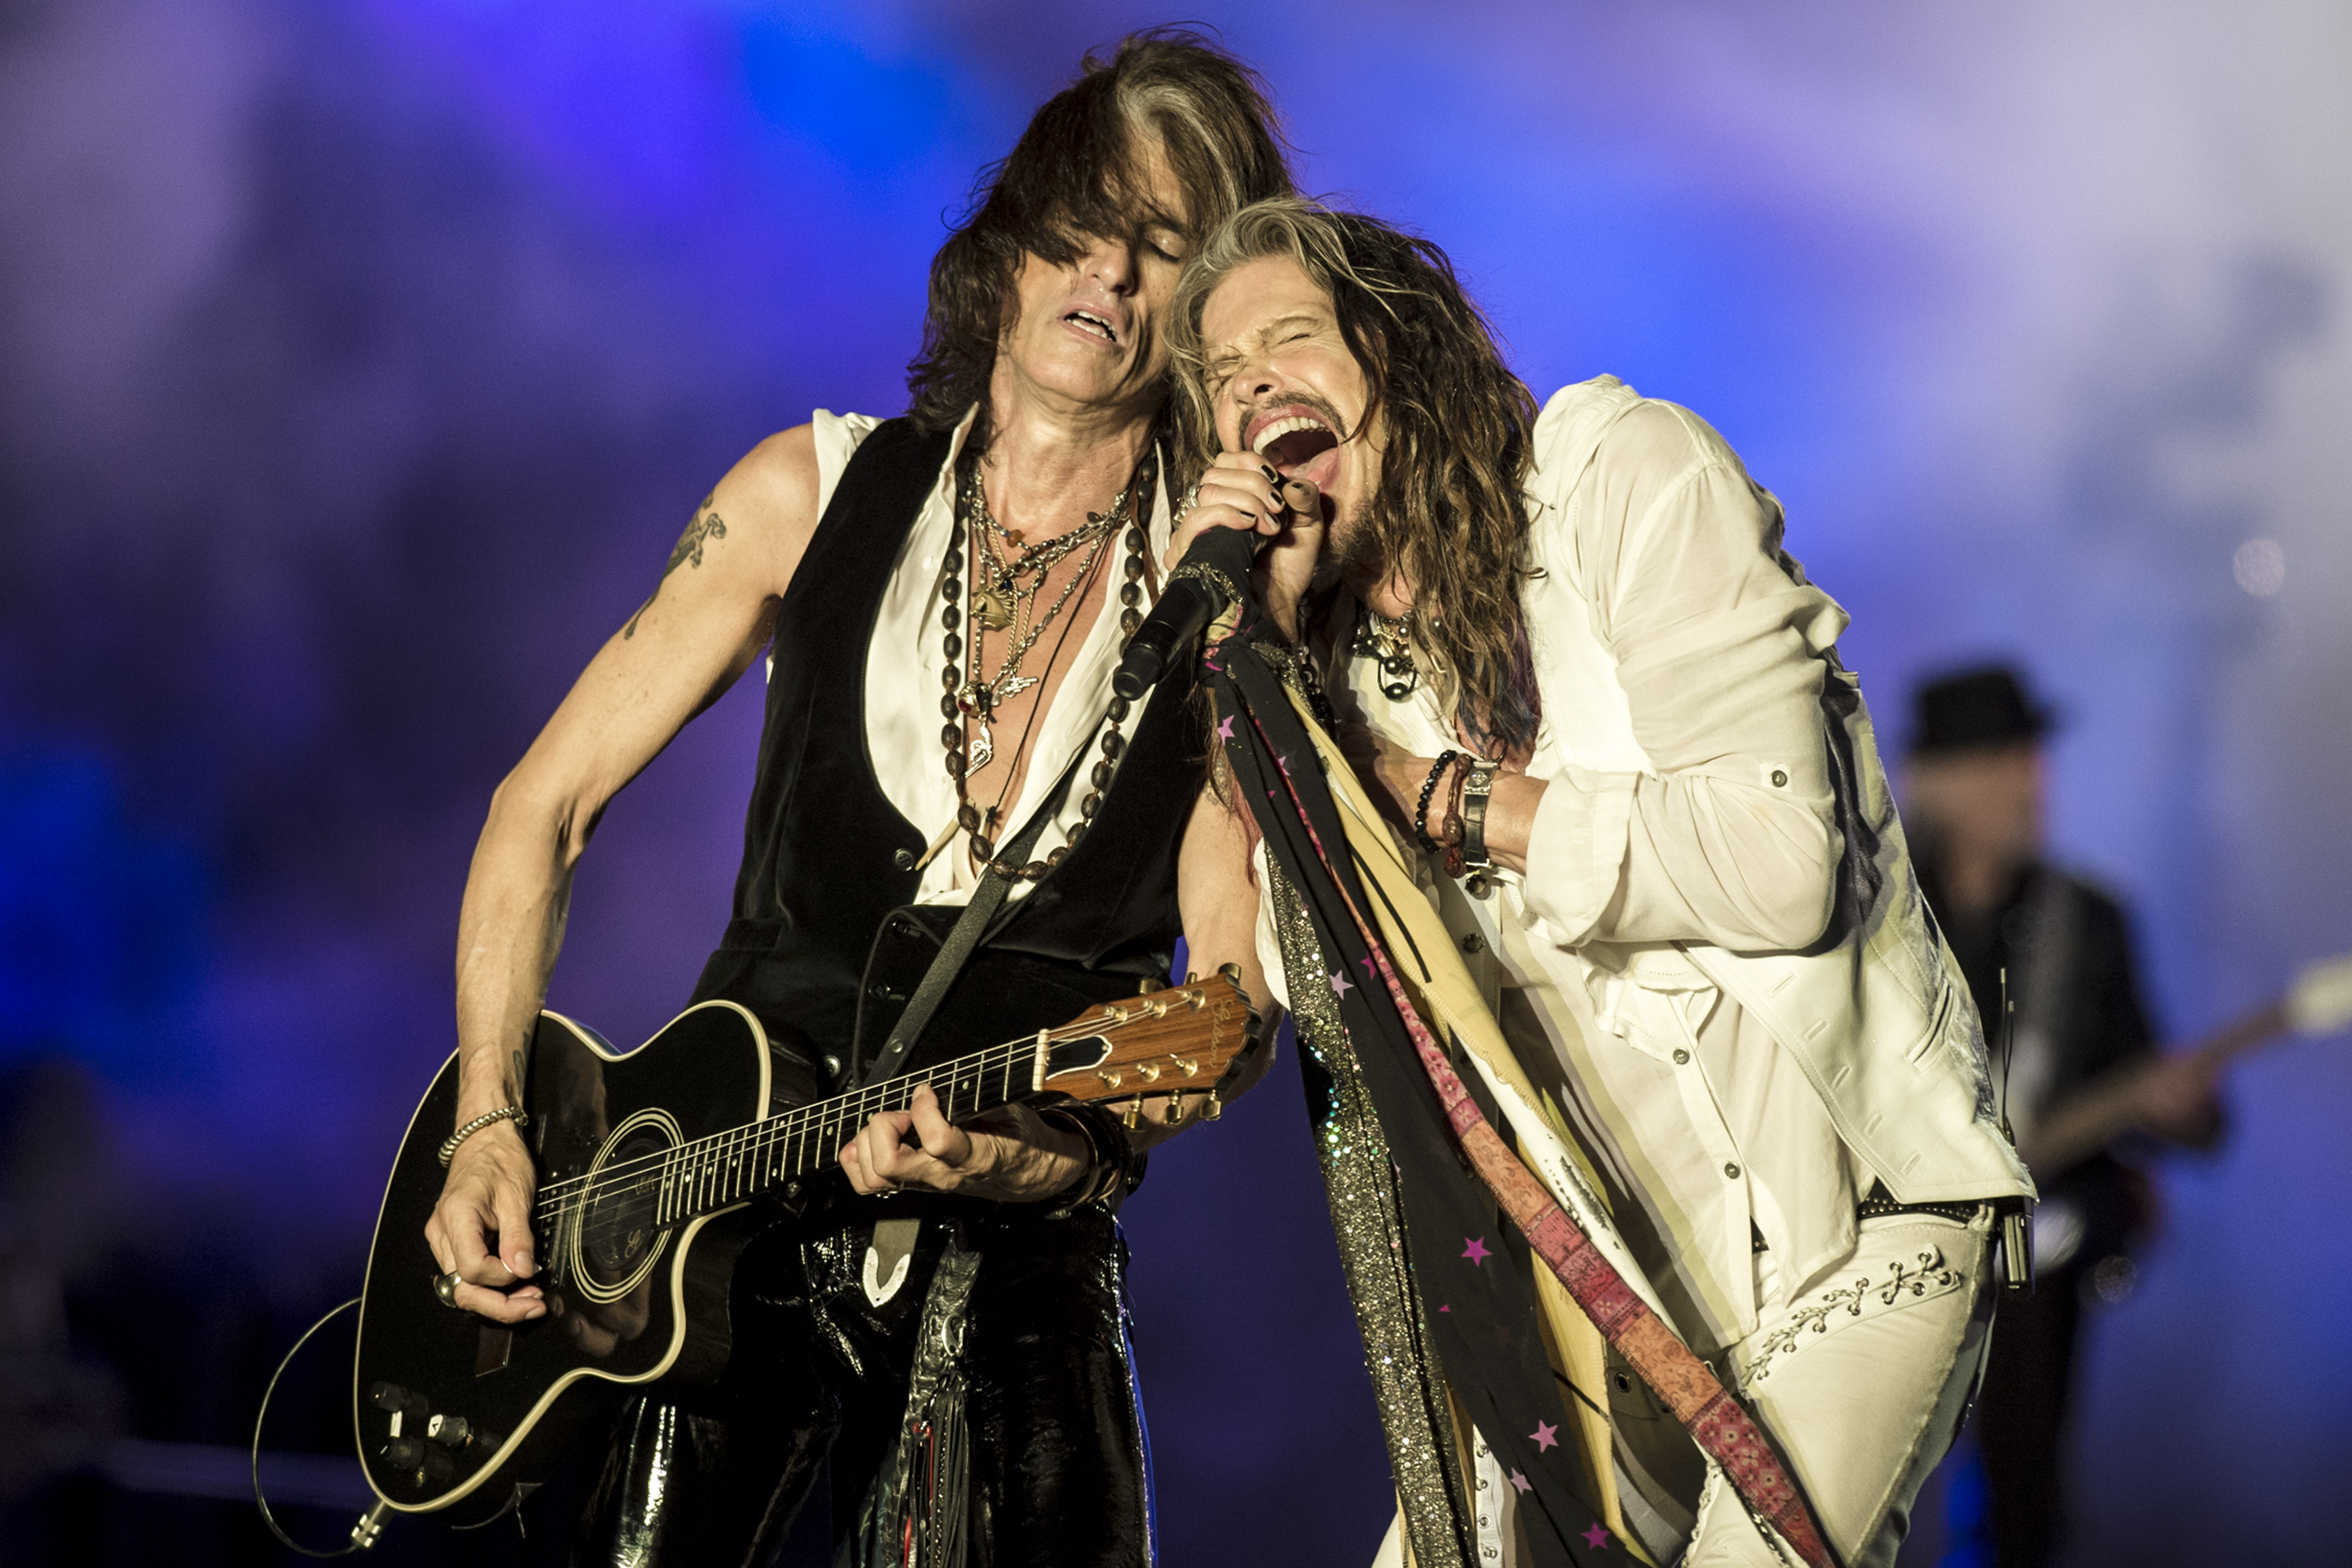 Aerosmith at DOWNLOAD Festival 2014 - Day 3